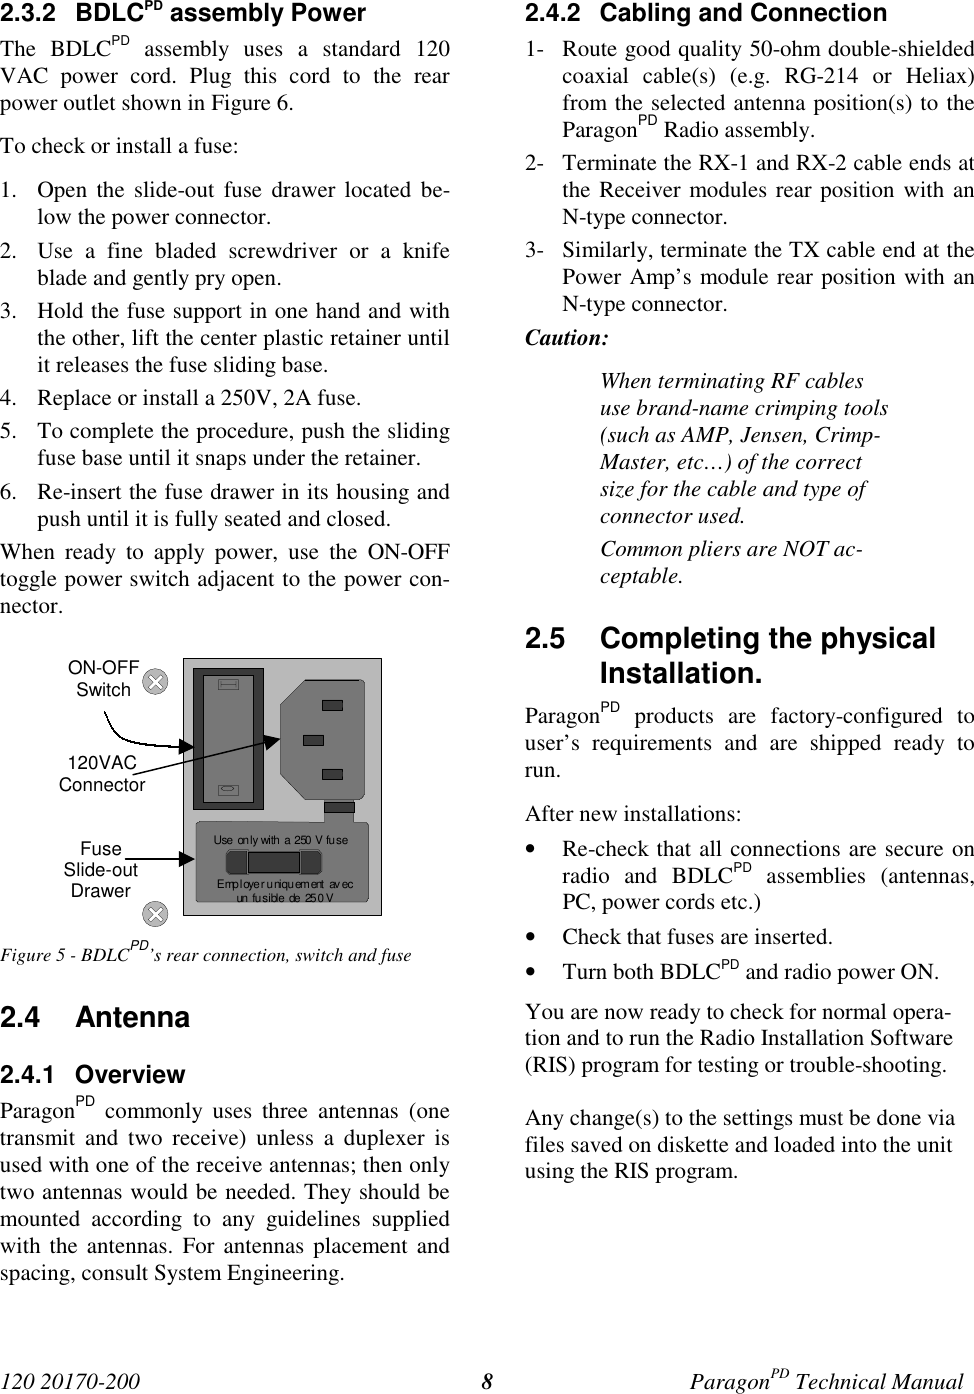 120 20170-200 ParagonPD Technical Manual82.3.2 BDLCPD assembly PowerThe BDLCPD assembly uses a standard 120VAC power cord. Plug this cord to the rearpower outlet shown in Figure 6.To check or install a fuse:1. Open the slide-out fuse drawer located be-low the power connector.2. Use a fine bladed screwdriver or a knifeblade and gently pry open.3. Hold the fuse support in one hand and withthe other, lift the center plastic retainer untilit releases the fuse sliding base.4. Replace or install a 250V, 2A fuse.5. To complete the procedure, push the slidingfuse base until it snaps under the retainer.6. Re-insert the fuse drawer in its housing andpush until it is fully seated and closed.When ready to apply power, use the ON-OFFtoggle power switch adjacent to the power con-nector.Figure 5 - BDLCPD’s rear connection, switch and fuse2.4 Antenna2.4.1 OverviewParagonPD commonly uses three antennas (onetransmit and two receive) unless a duplexer isused with one of the receive antennas; then onlytwo antennas would be needed. They should bemounted according to any guidelines suppliedwith the antennas. For antennas placement andspacing, consult System Engineering.2.4.2  Cabling and Connection1- Route good quality 50-ohm double-shieldedcoaxial cable(s) (e.g. RG-214 or Heliax)from the selected antenna position(s) to theParagonPD Radio assembly.2- Terminate the RX-1 and RX-2 cable ends atthe Receiver modules rear position with anN-type connector.3- Similarly, terminate the TX cable end at thePower Amp’s module rear position with anN-type connector.Caution:When terminating RF cablesuse brand-name crimping tools(such as AMP, Jensen, Crimp-Master, etc…) of the correctsize for the cable and type ofconnector used.Common pliers are NOT ac-ceptable.2.5  Completing the physicalInstallation.ParagonPD products are factory-configured touser’s requirements and are shipped ready torun.After new installations:• Re-check that all connections are secure onradio and BDLCPD assemblies (antennas,PC, power cords etc.)• Check that fuses are inserted.• Turn both BDLCPD and radio power ON.You are now ready to check for normal opera-tion and to run the Radio Installation Software(RIS) program for testing or trouble-shooting.Any change(s) to the settings must be done viafiles saved on diskette and loaded into the unitusing the RIS program.Employer uniquement  avecun  fu s ible  de  25 0 VUse only with  a  250 V fu seON-OFFSwitch120VACConnectorFuseSlide-outDrawer